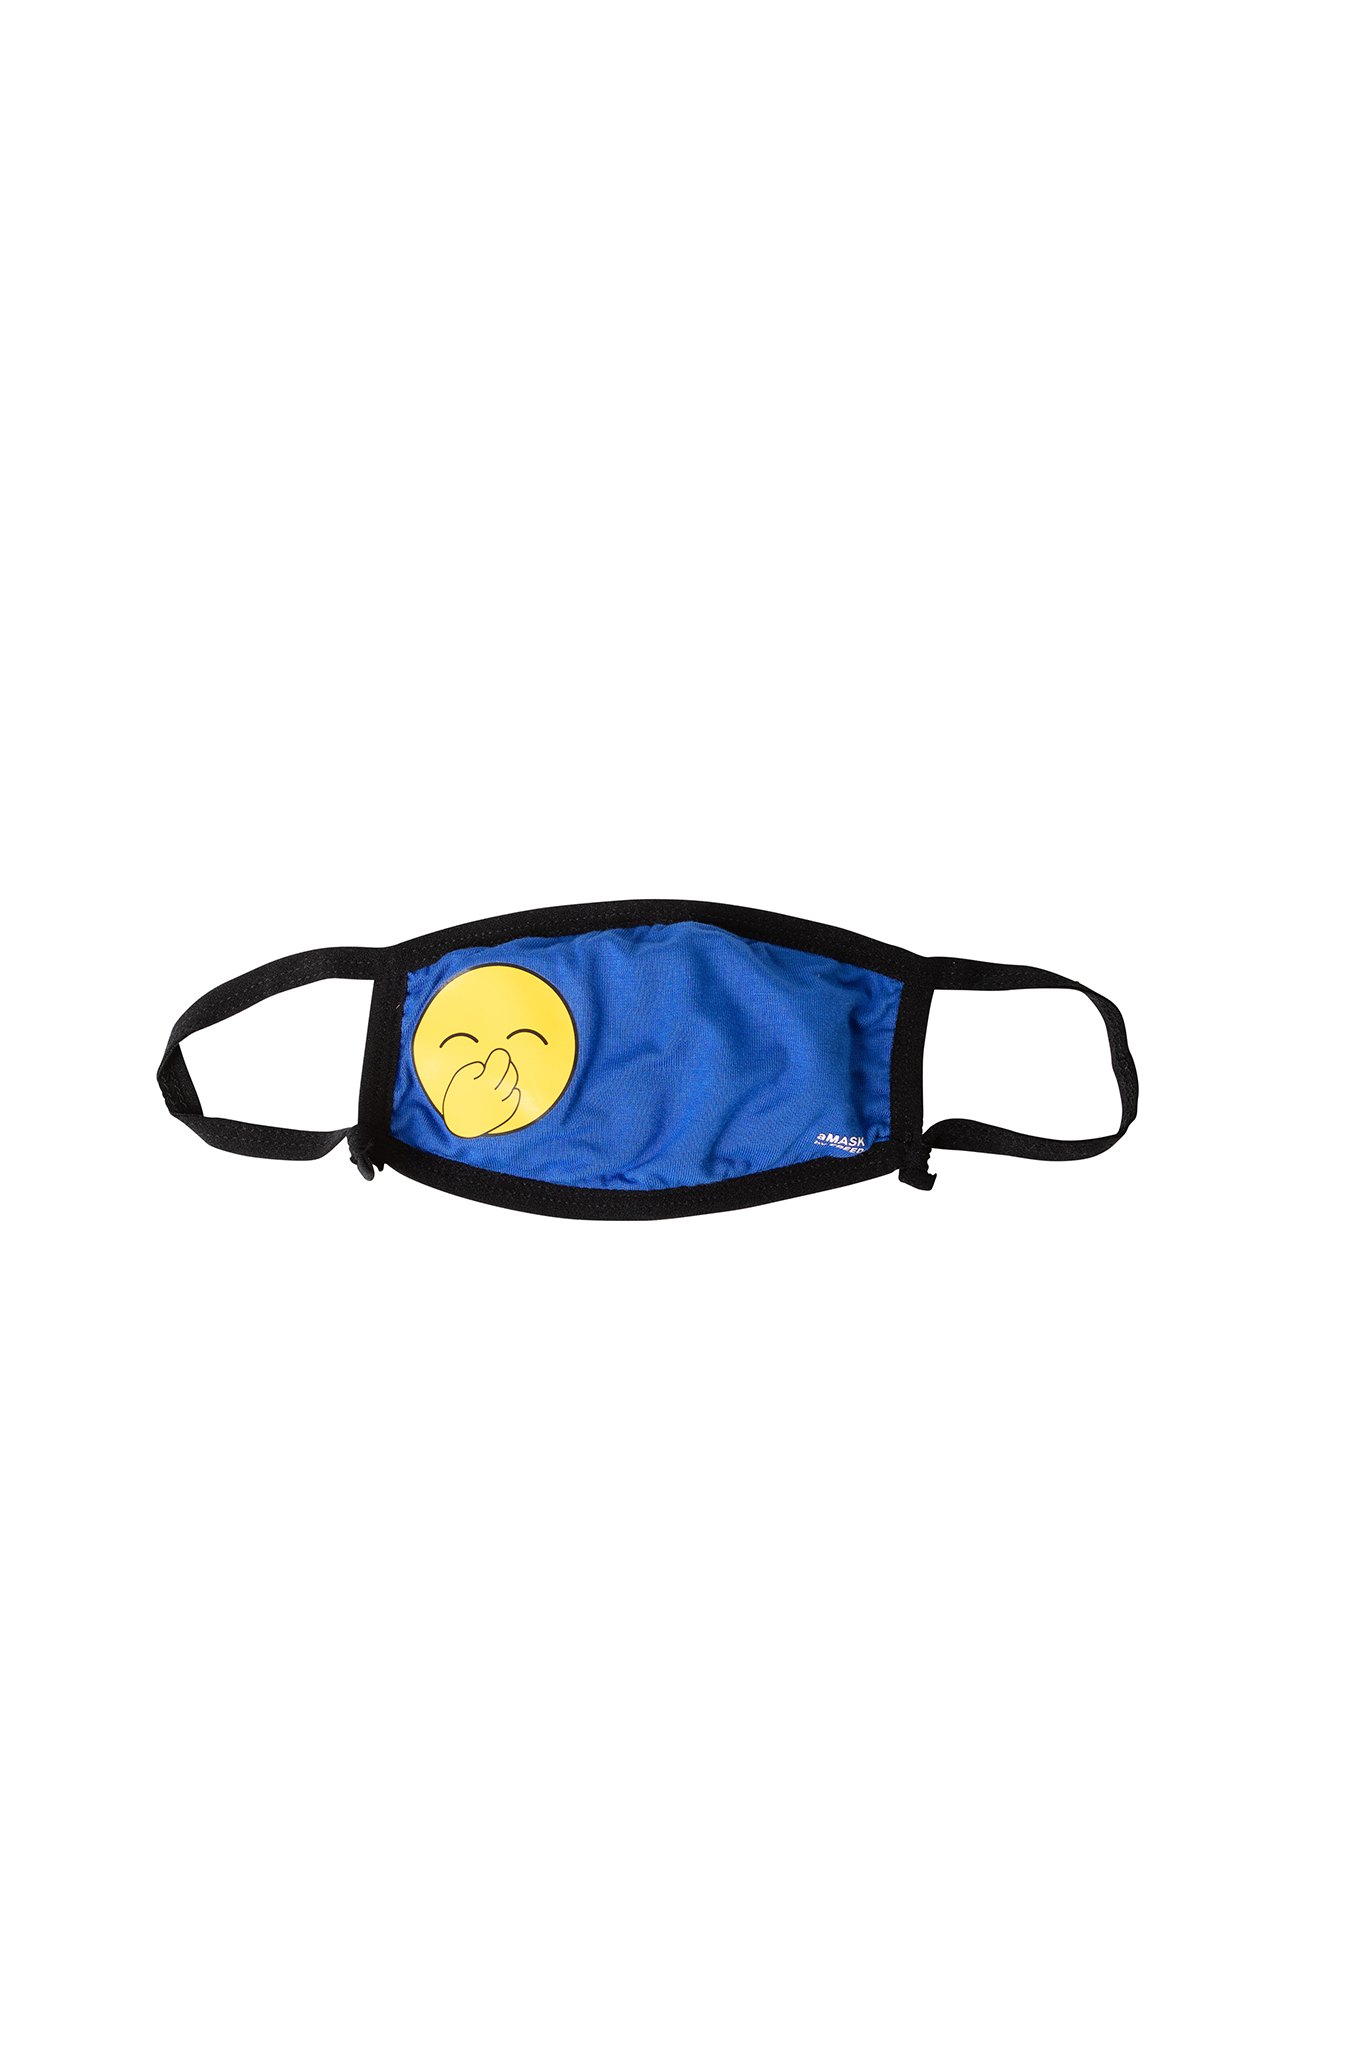 Kid's cotton breathable face mask.